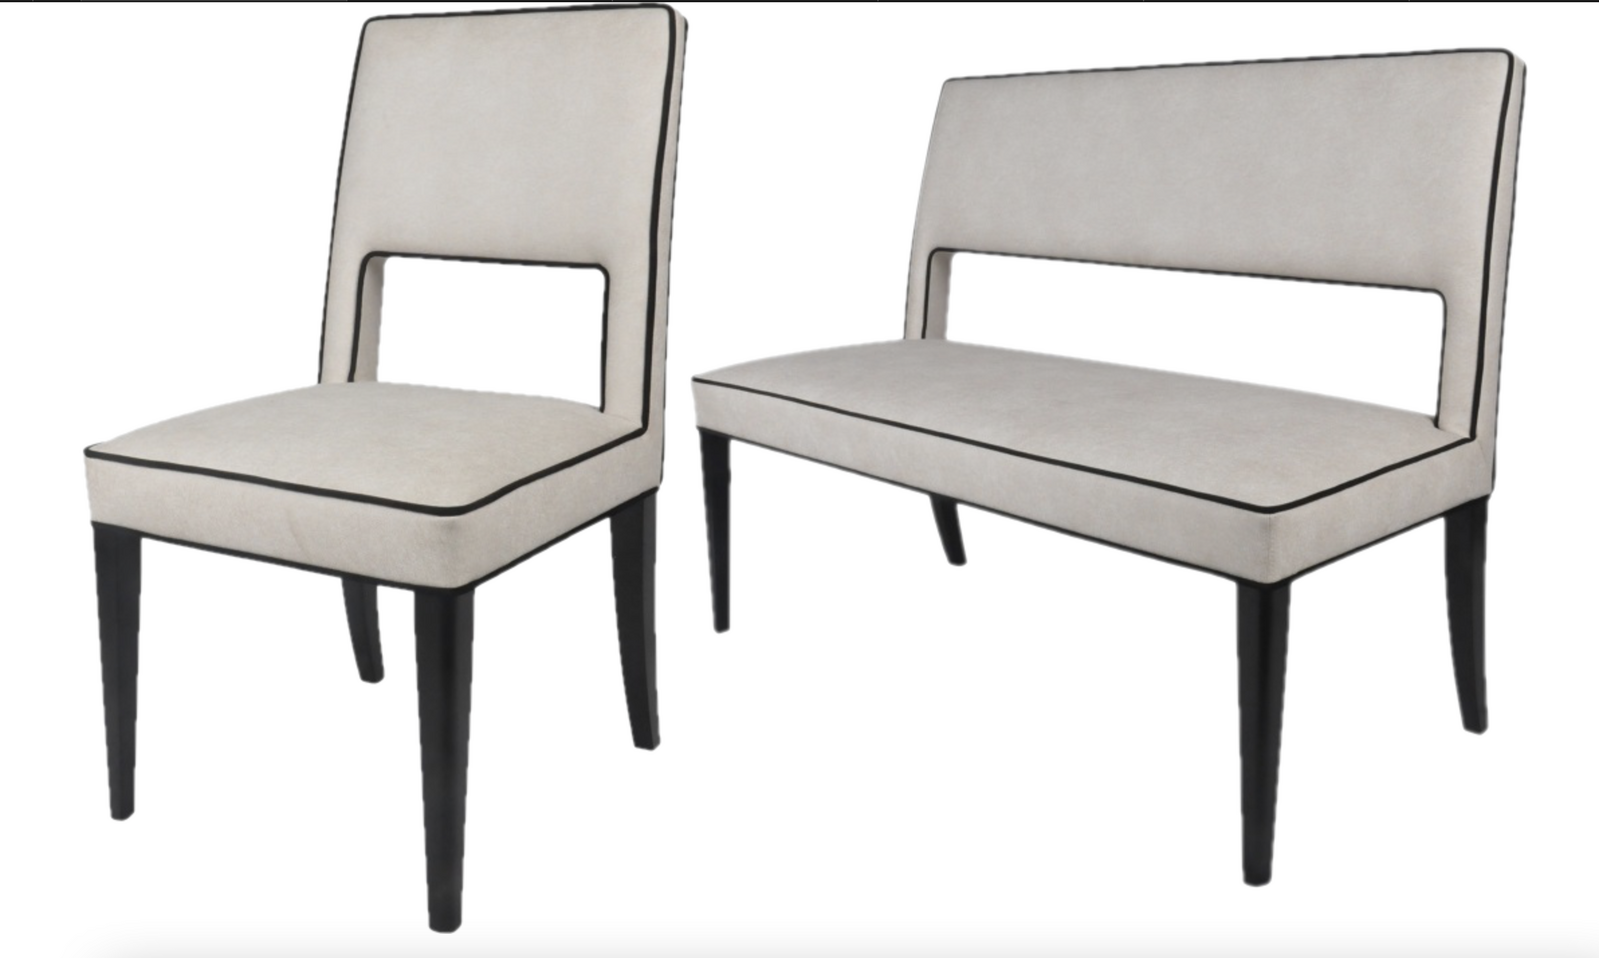 WHITLEY | FABRIC DINING CHAIR RANGE